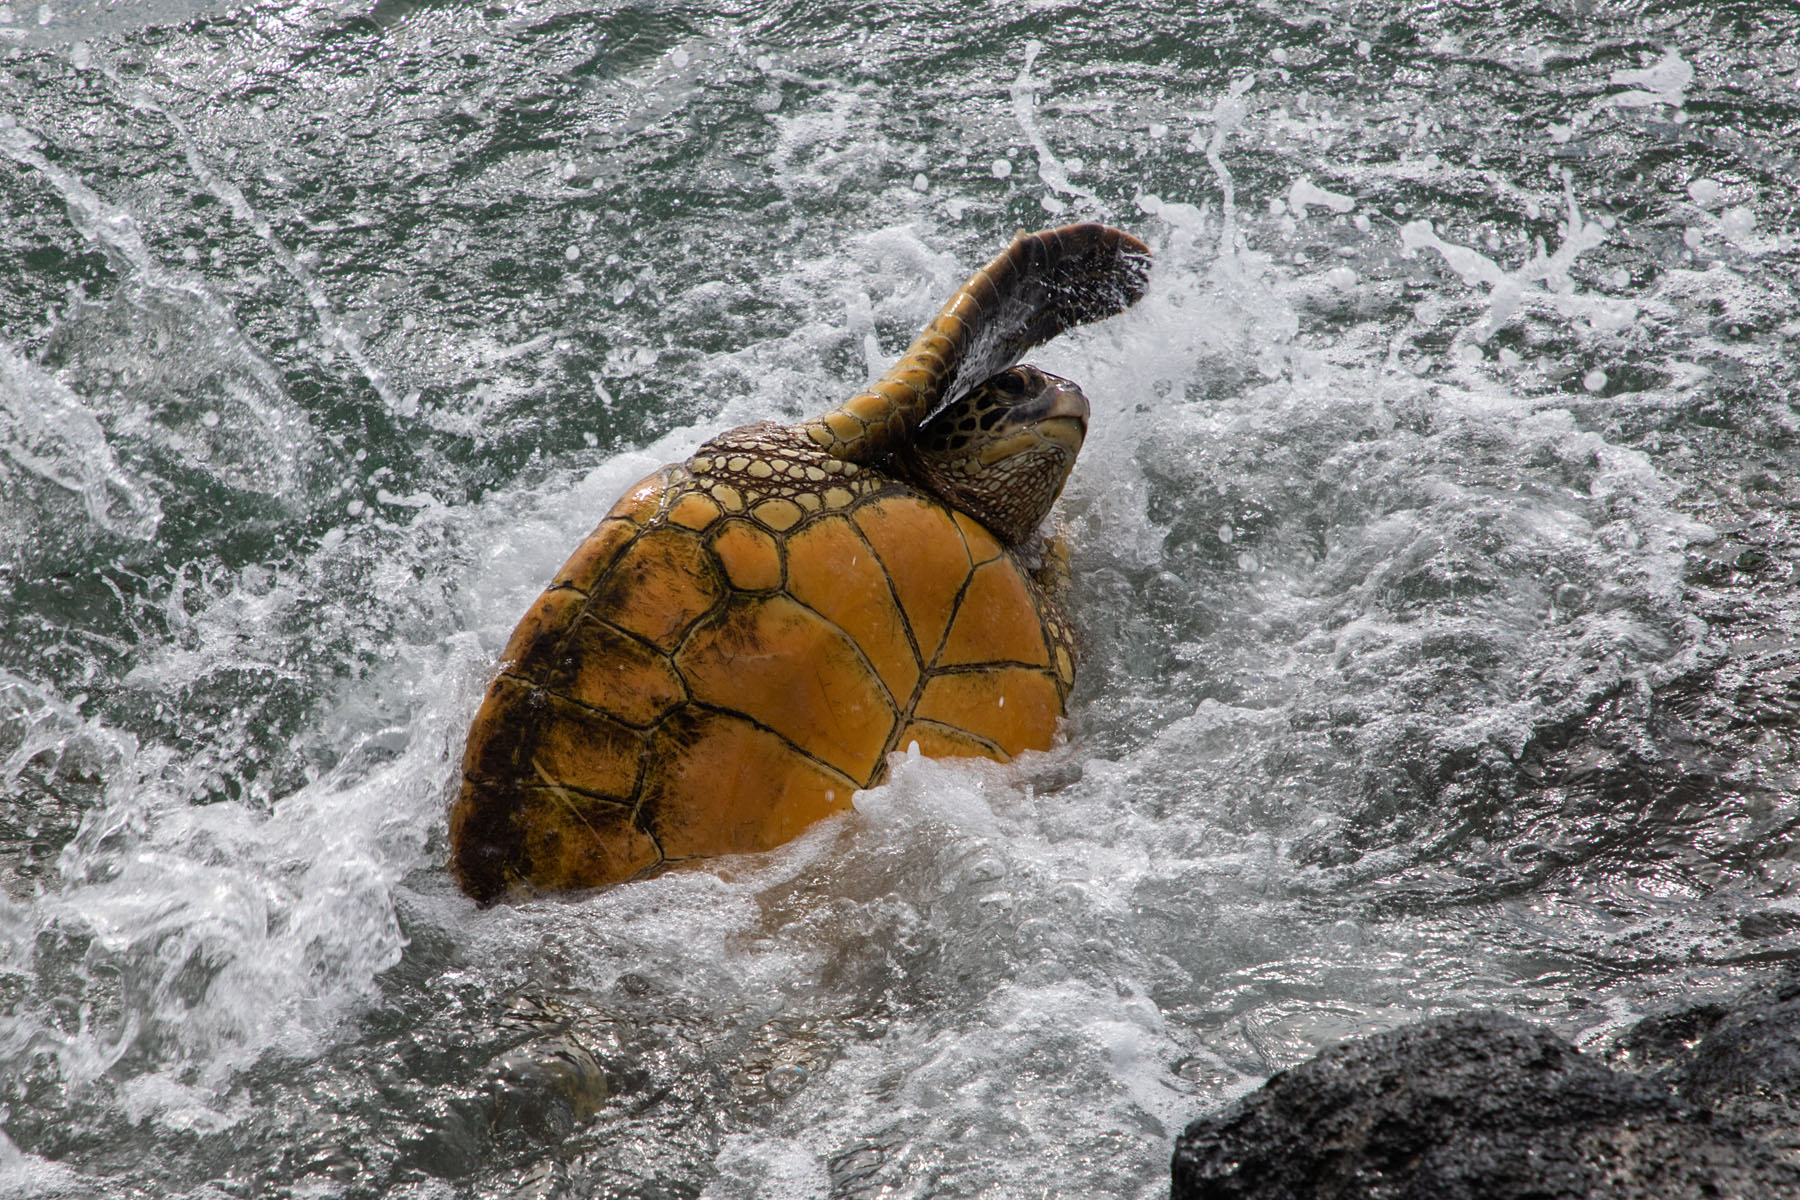 Green Sea Turtle tries to right itself, Maui.  Click for next photo.